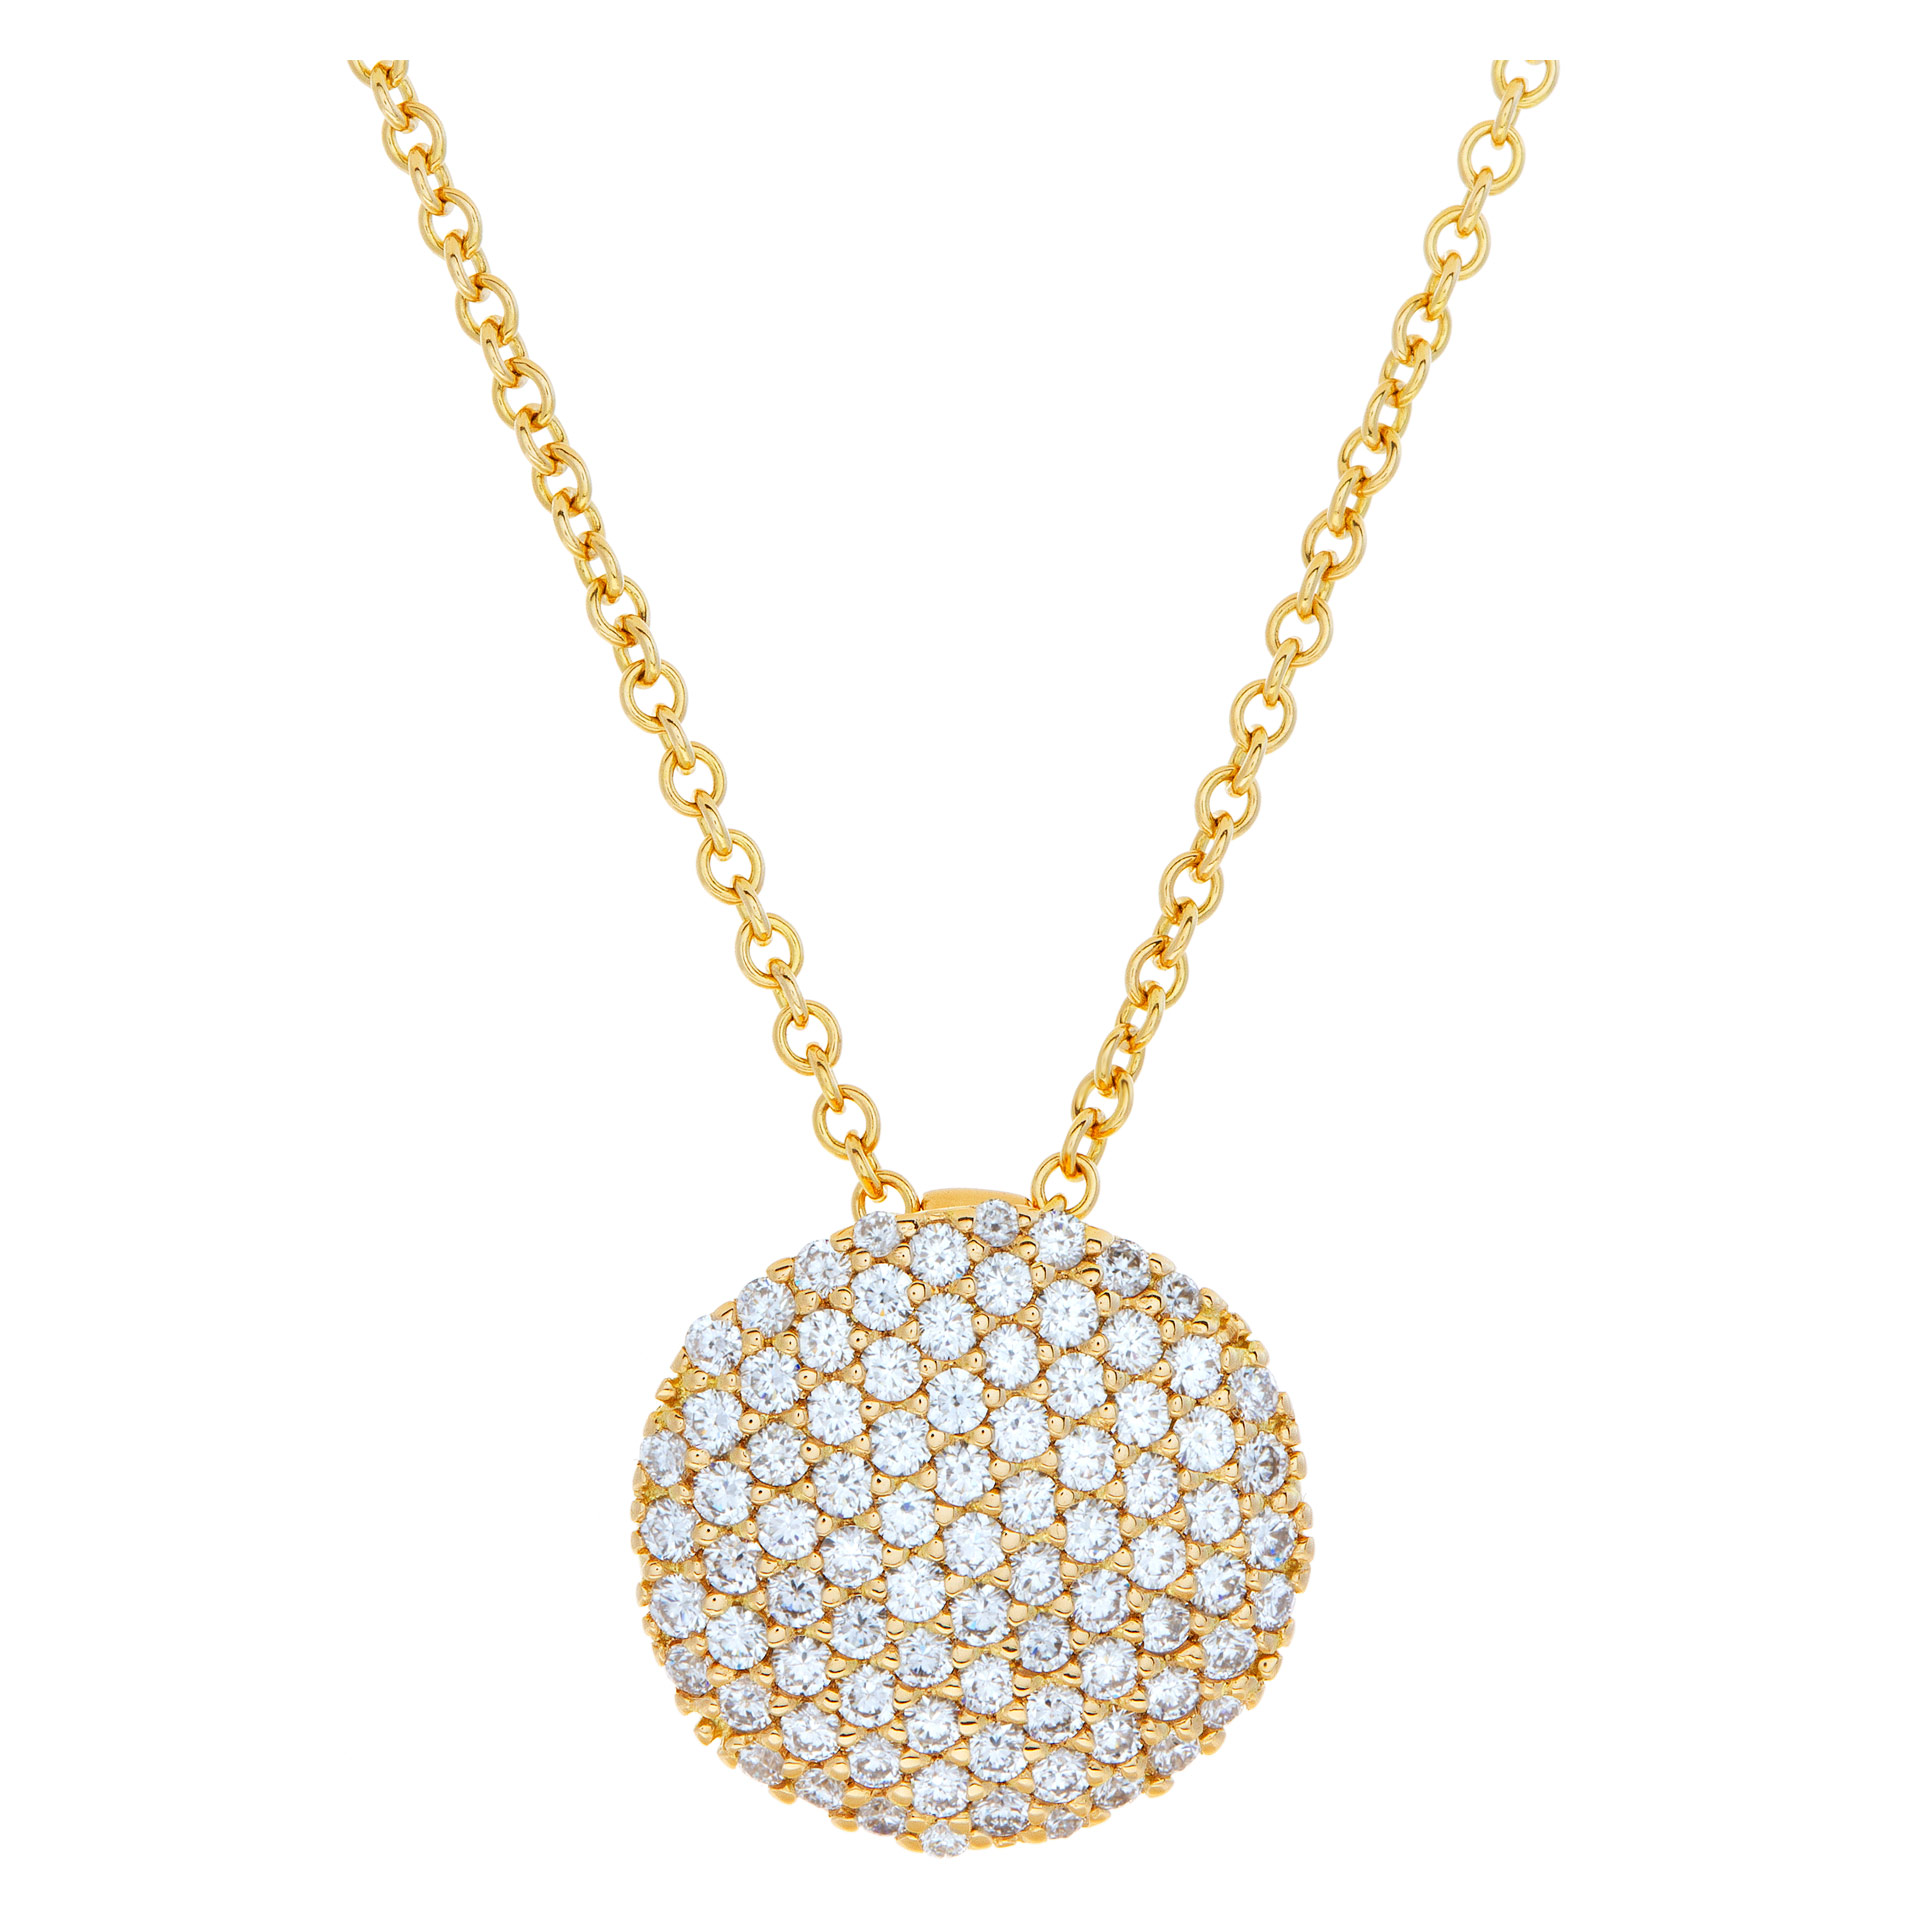 Italian design, pave diamond pendant with 18k yellow gold chain necklace (16"), total approx. diamond weight: 1.25 carat.